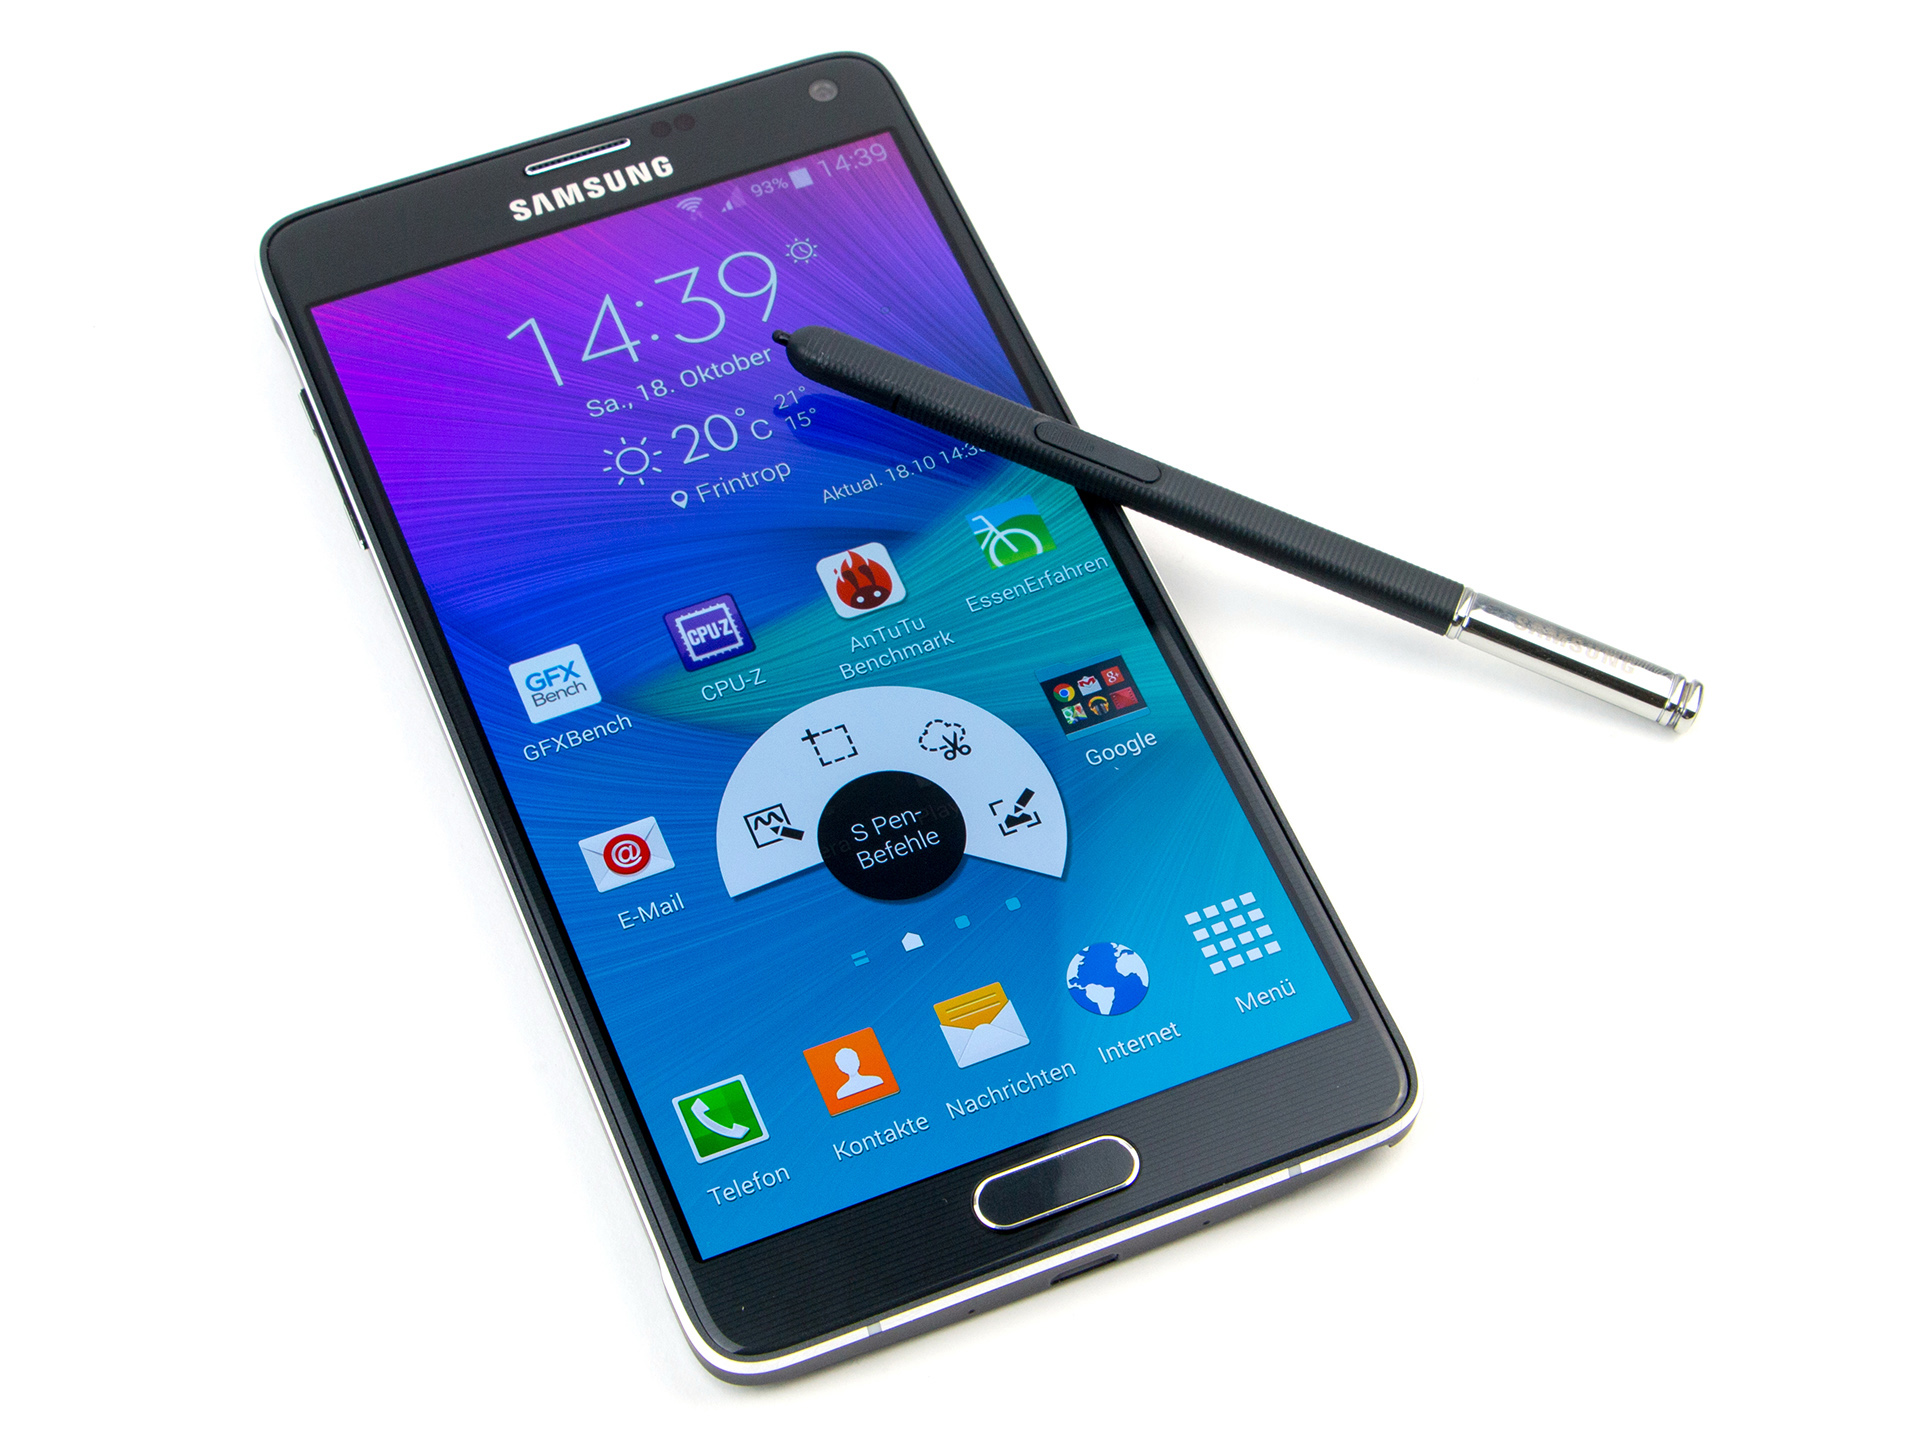 Galaxy s note. Samsung Galaxy Note 4. Samsung Galaxy Note 4 SM-n910f. Samsung n910 Galaxy Note 4. Samsung Galaxy Note 5 910f.